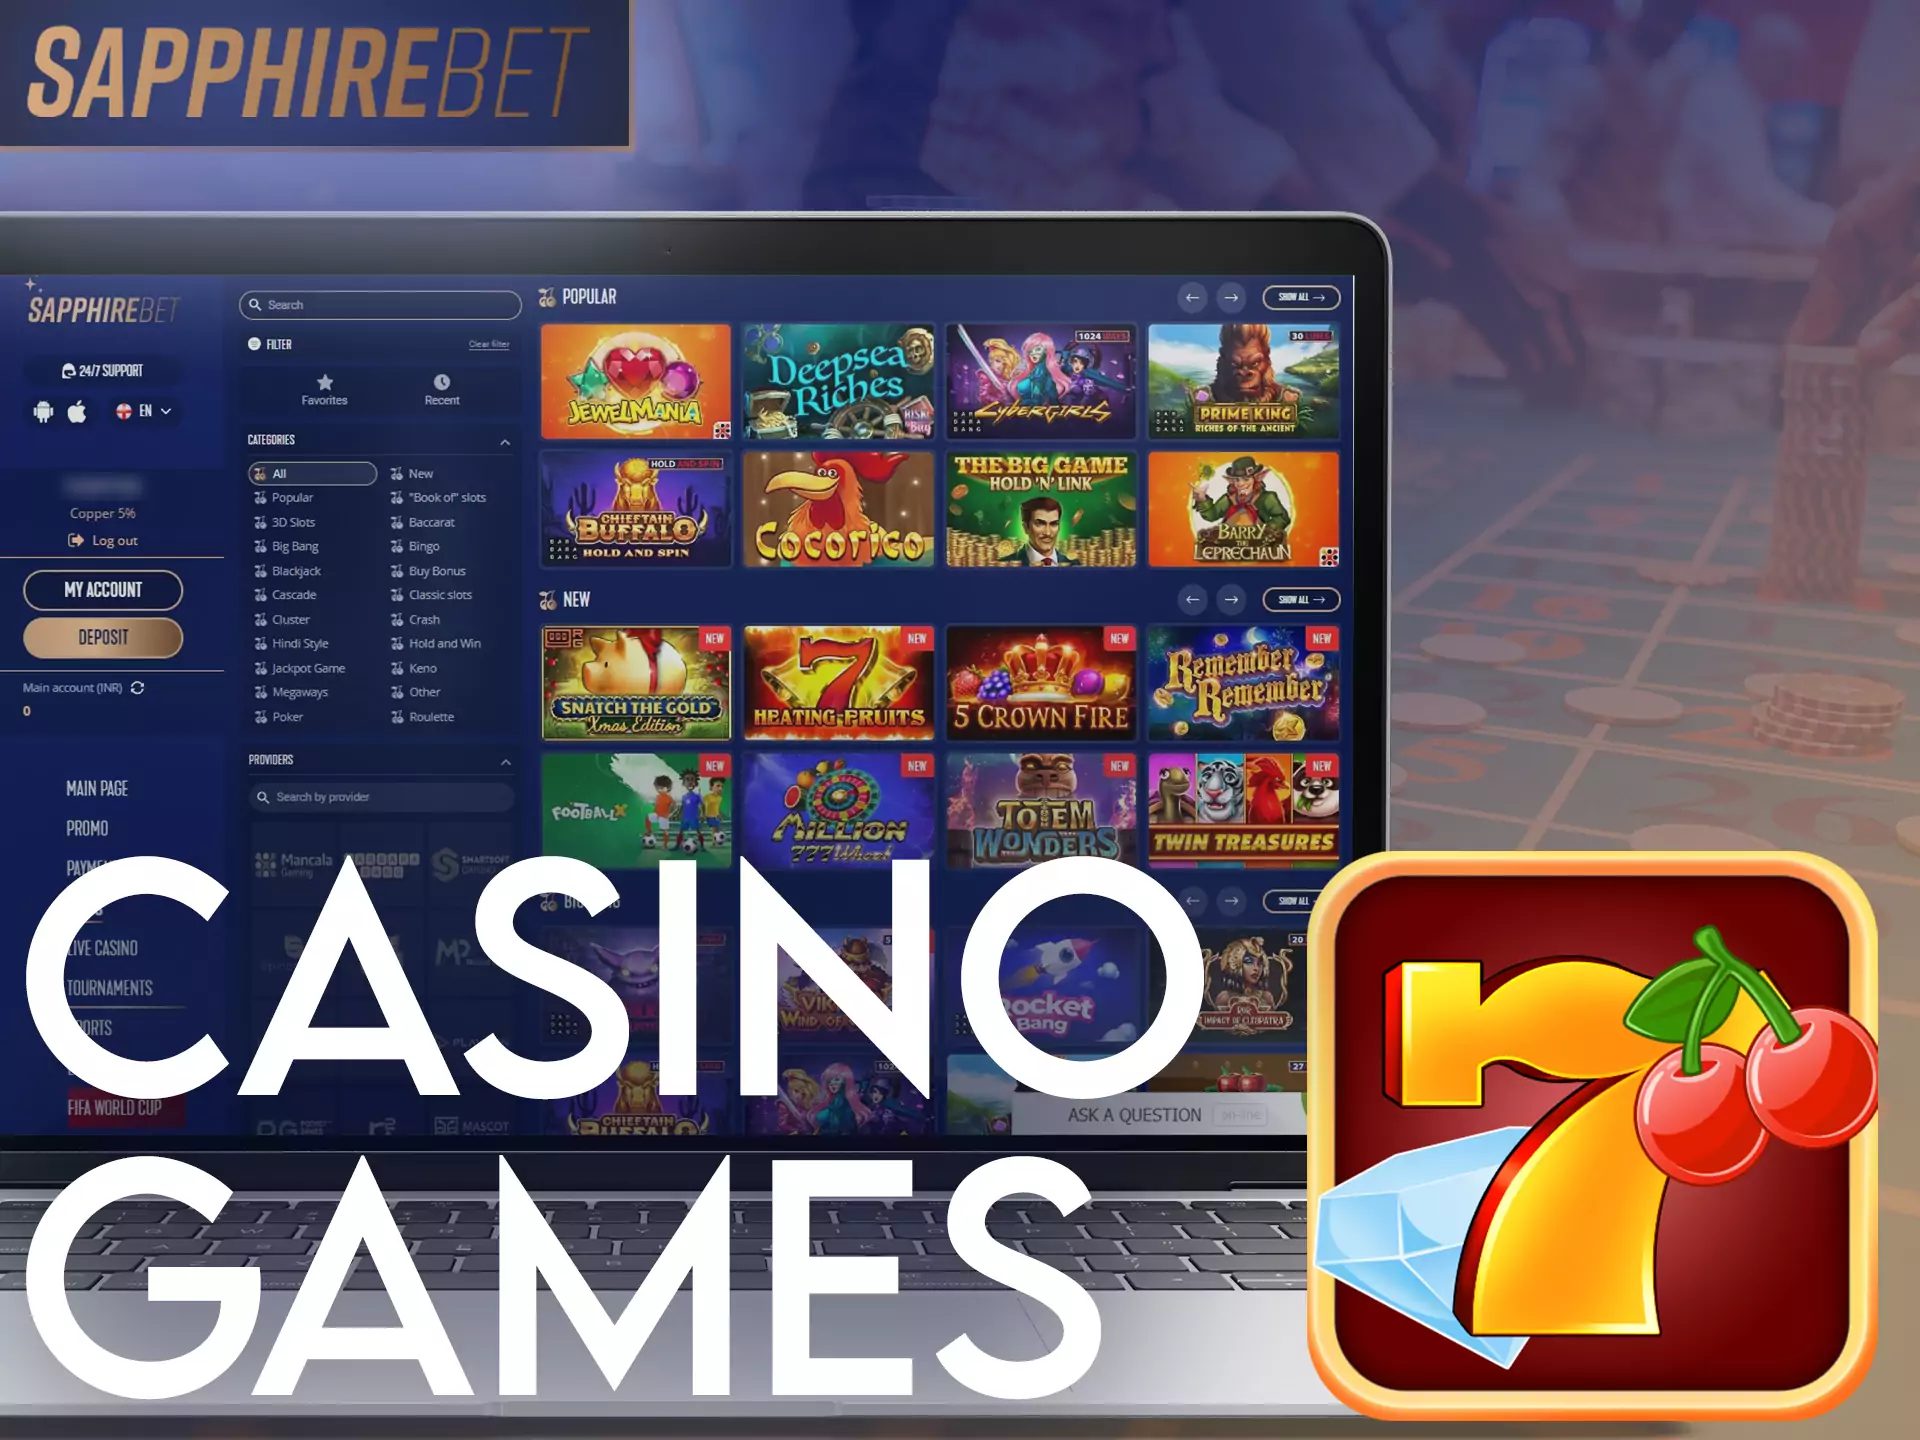 Try any games at Sapphirebet Casino, find your favorite one.